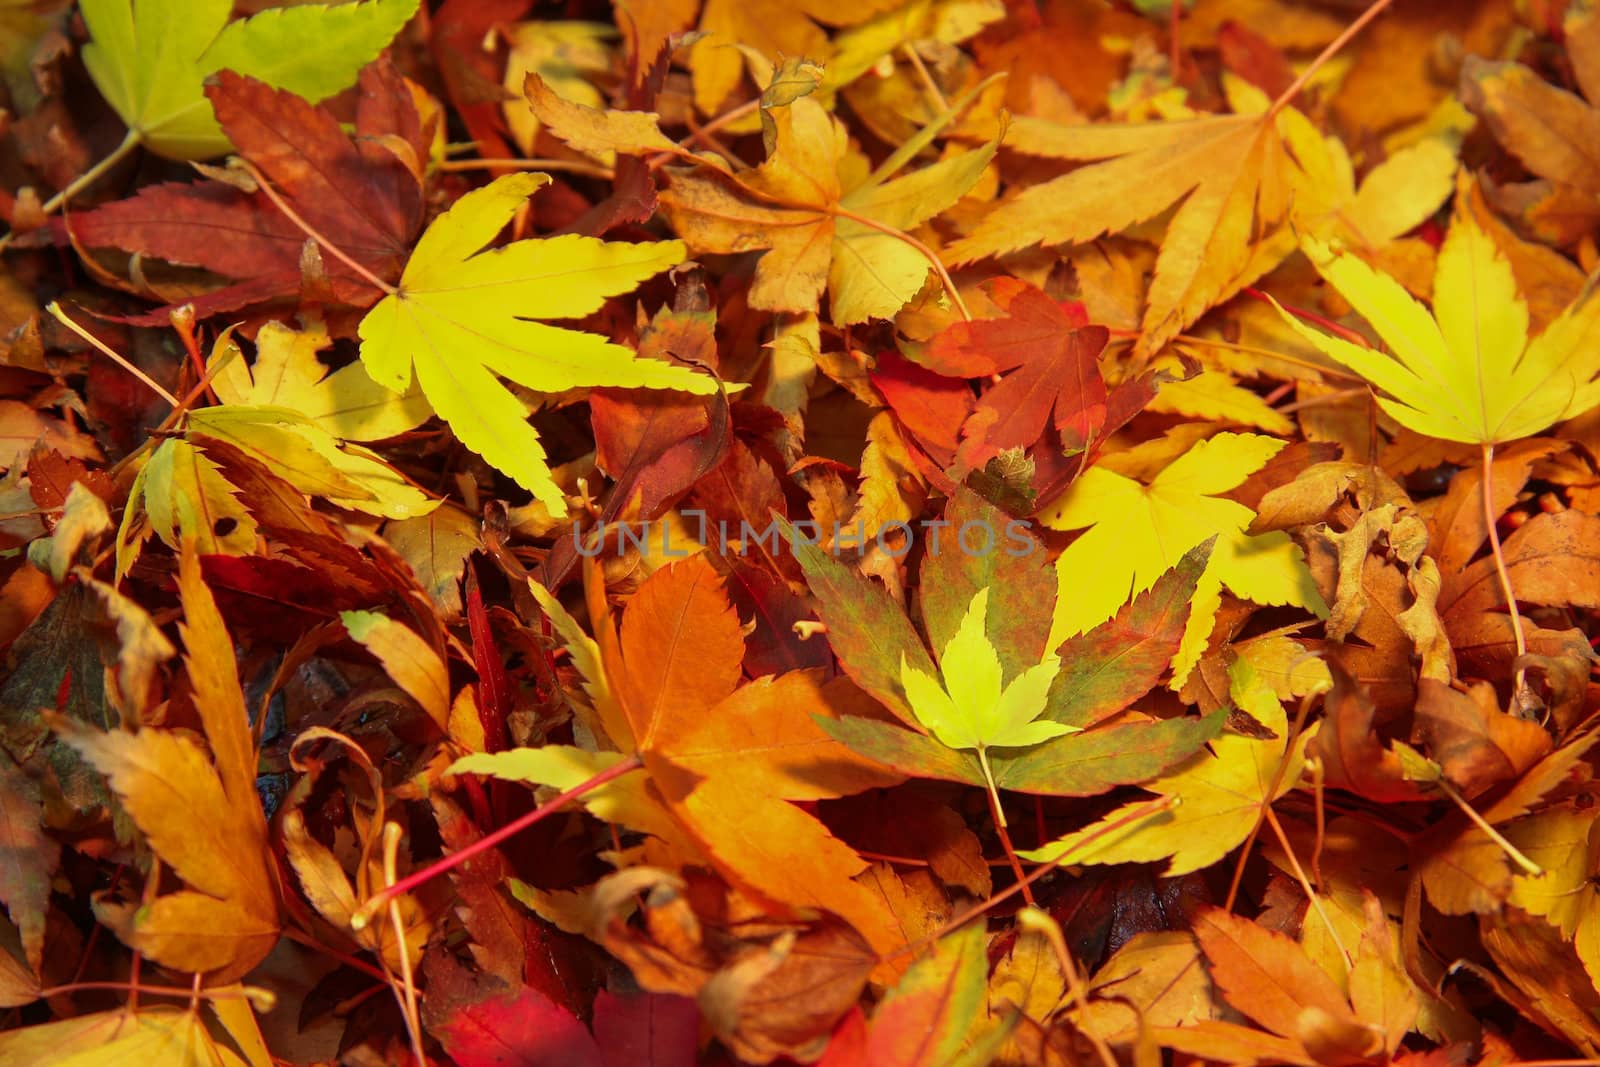 Autumn Leaves by michael_fox